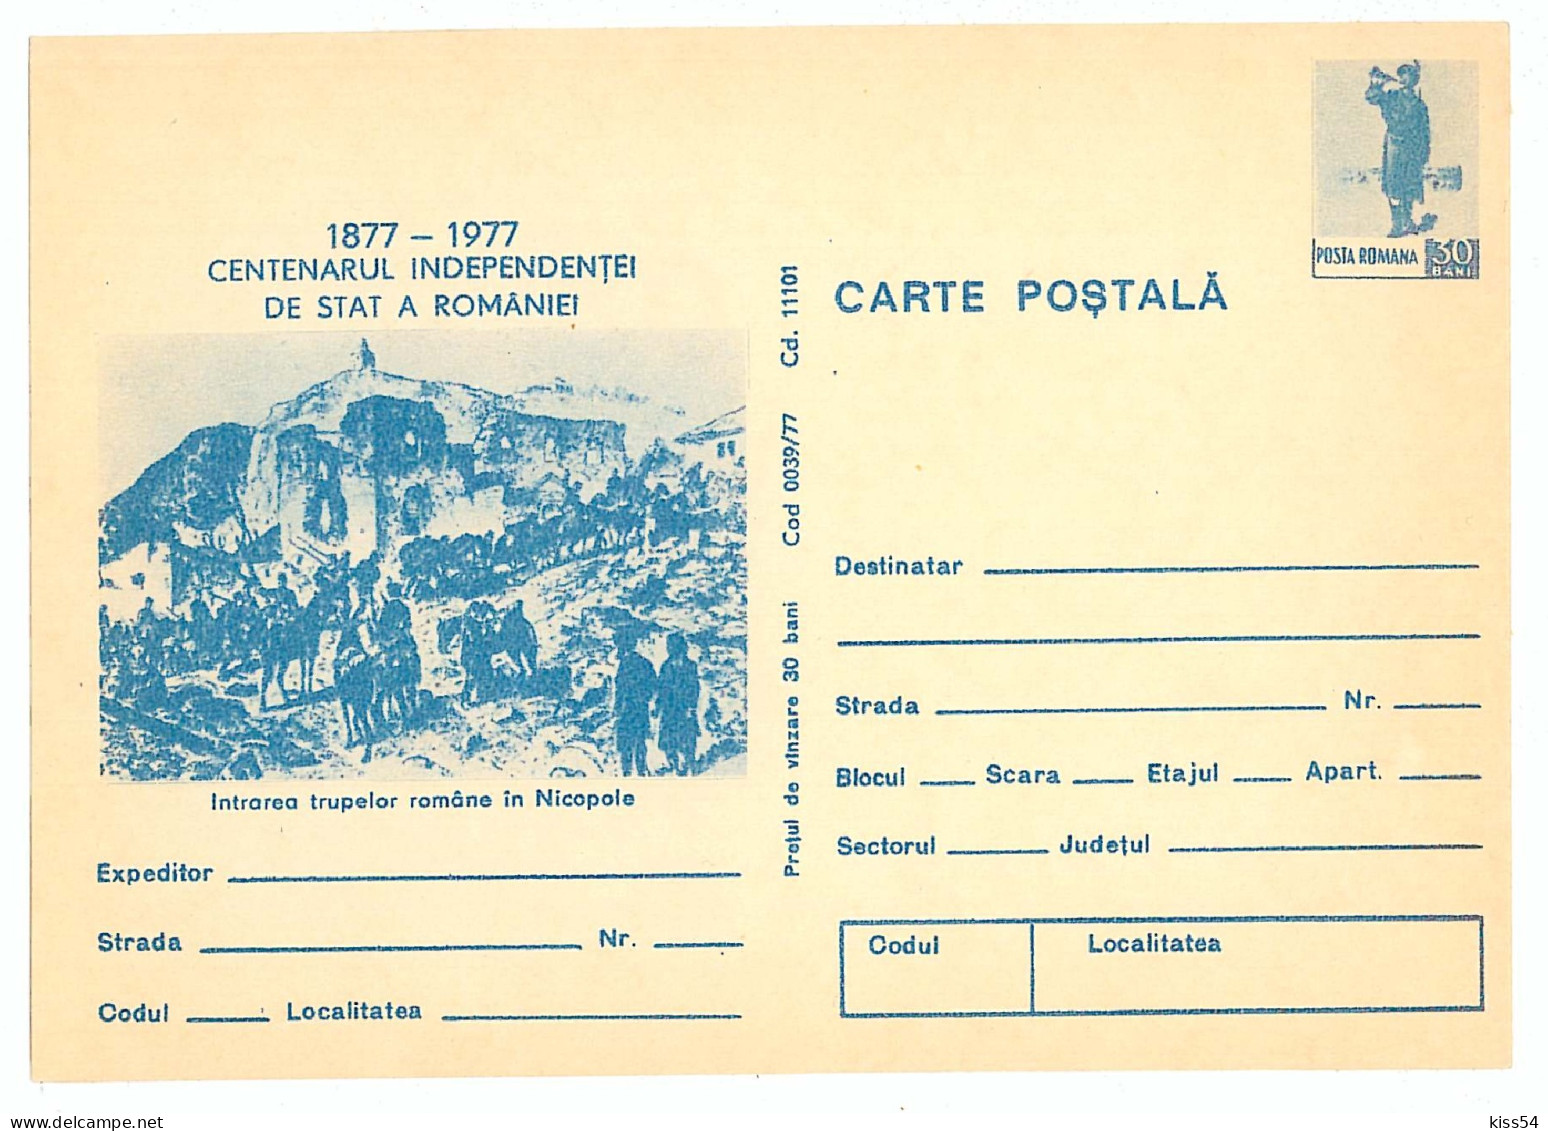 IP 77 A - 39 Centenary Independence Of Romania - Stationery - Unused - 1977 - Postal Stationery